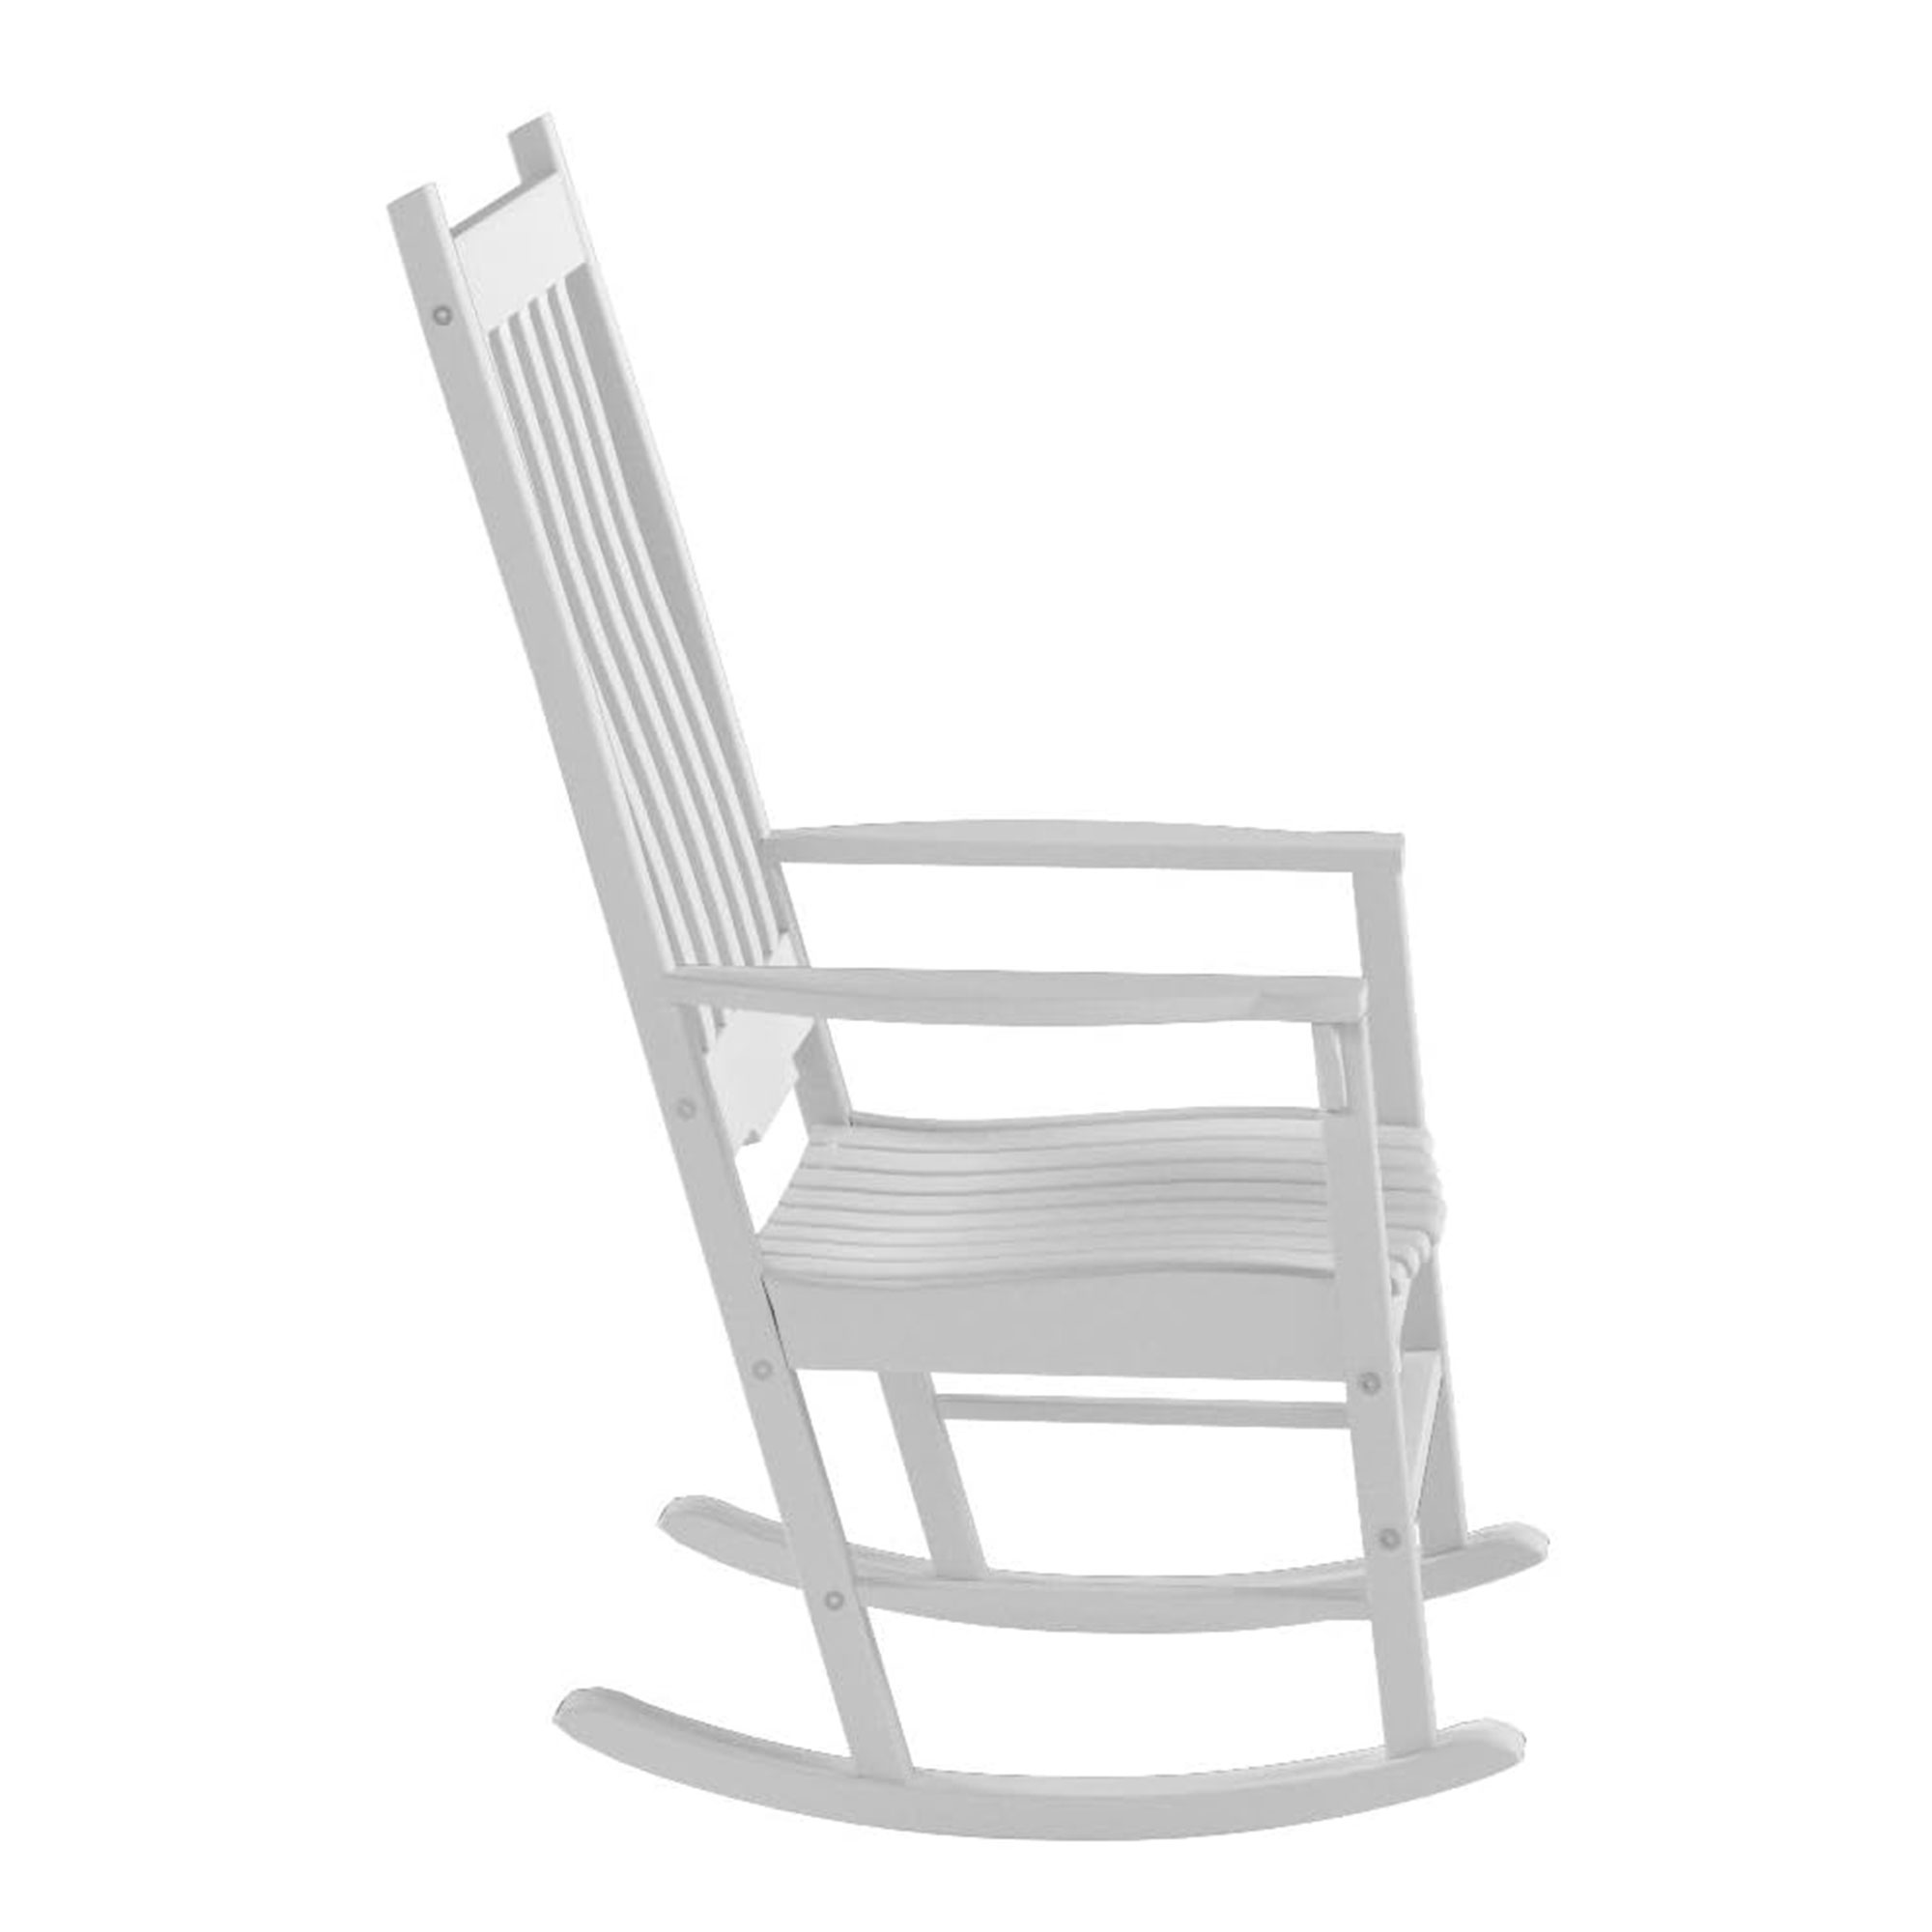 Northbeam Solid Acacia Hardwood Outdoor Patio Slatted Back Rocking Chair, White - image 4 of 11